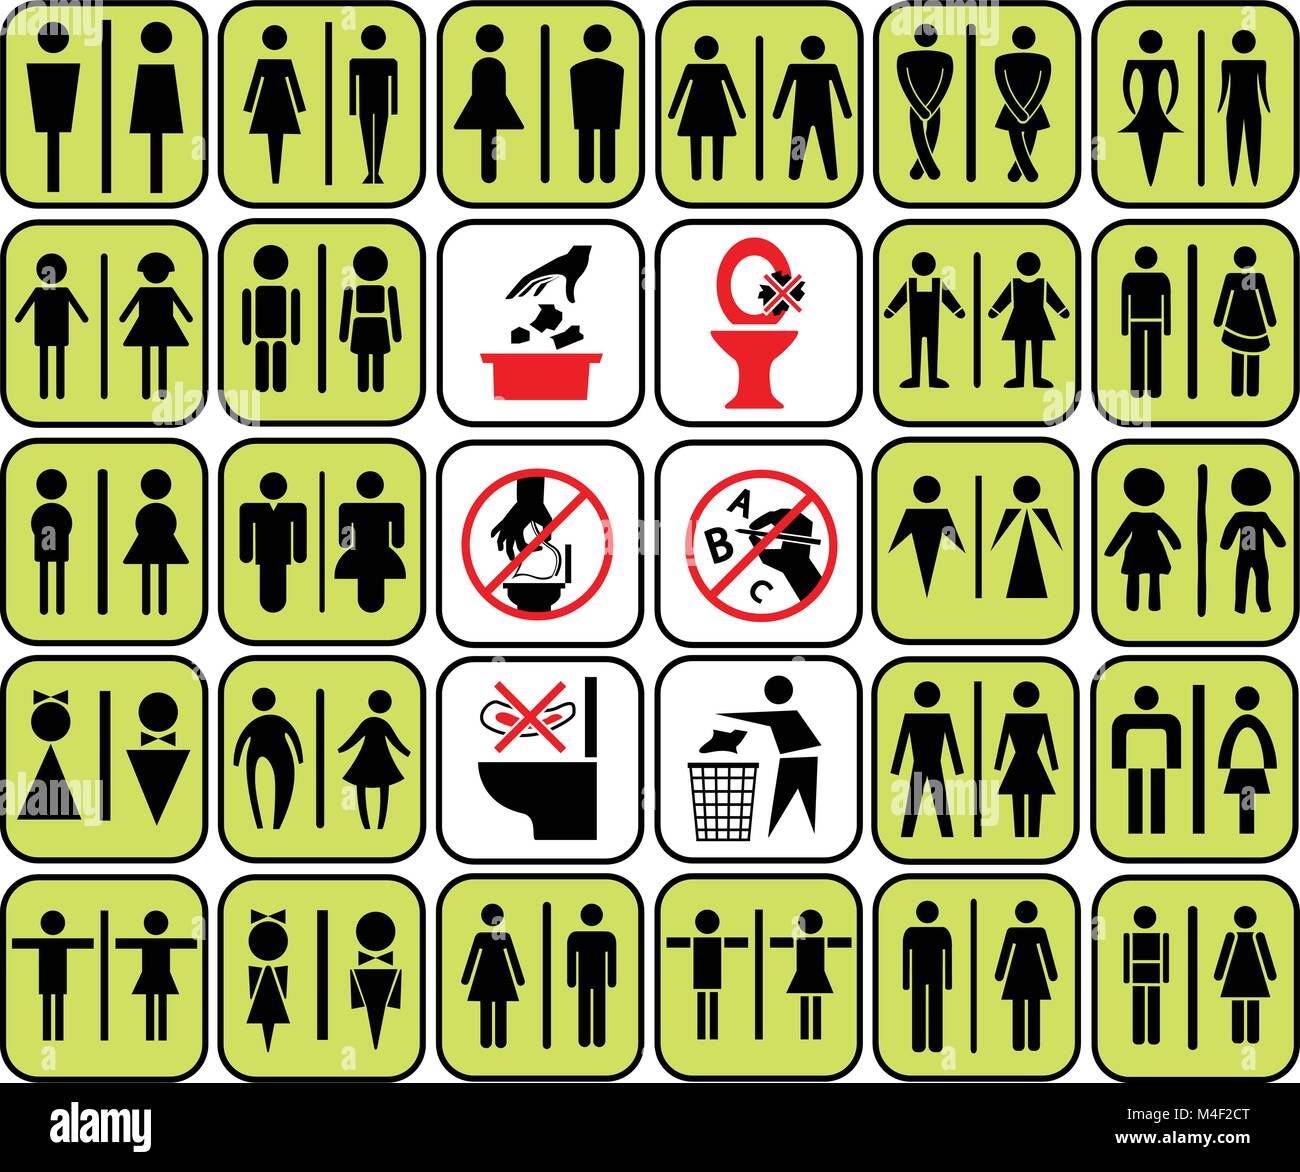 modern style of colorful toilet sign with baby, men, women, pregnant women, aged, handicapped in art style design and access use warning in toilet , v Stock Vector